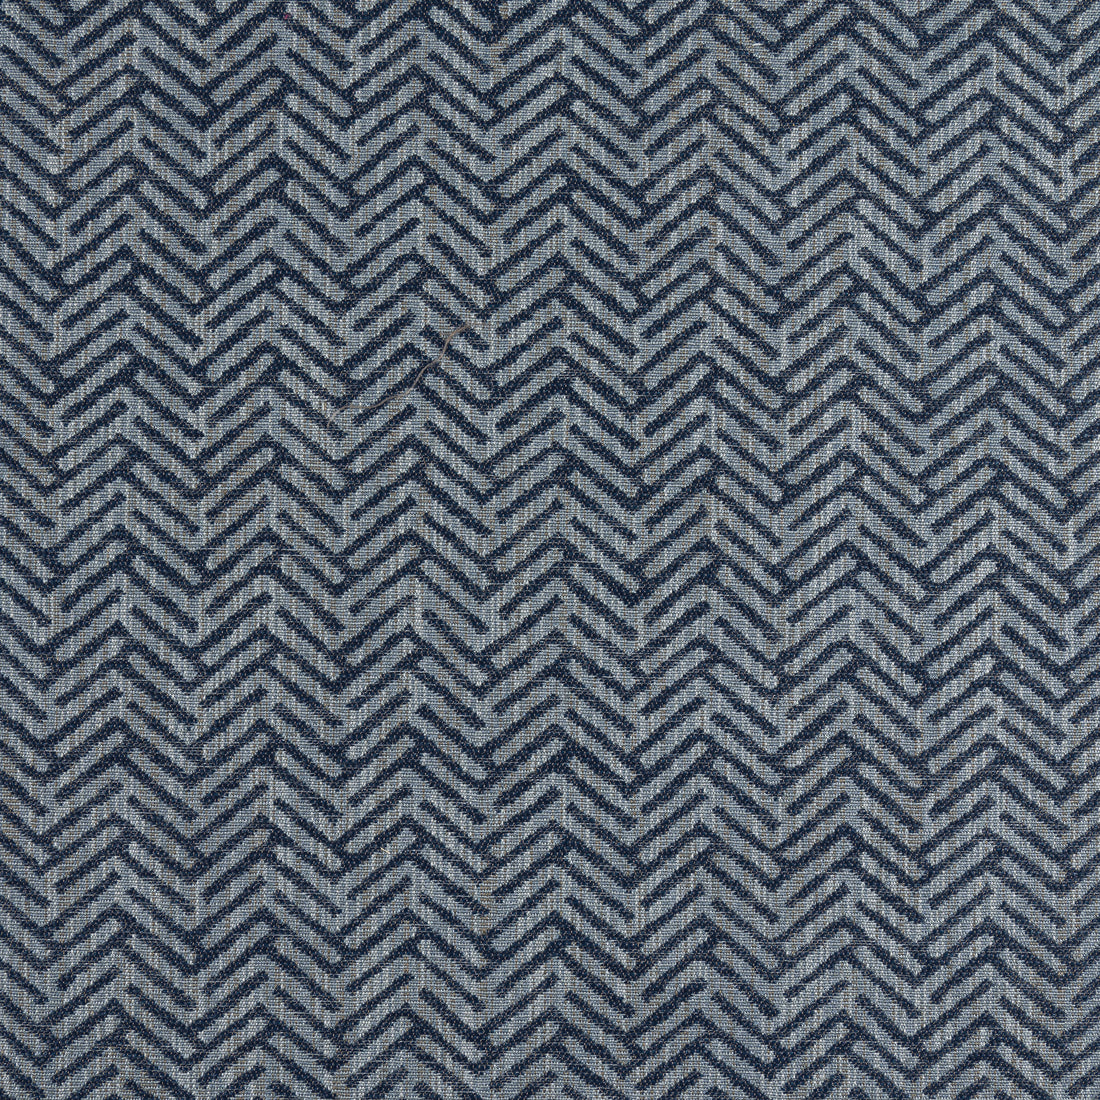 Varenna fabric in indigo color - pattern number W8112 - by Thibaut in the Sereno collection